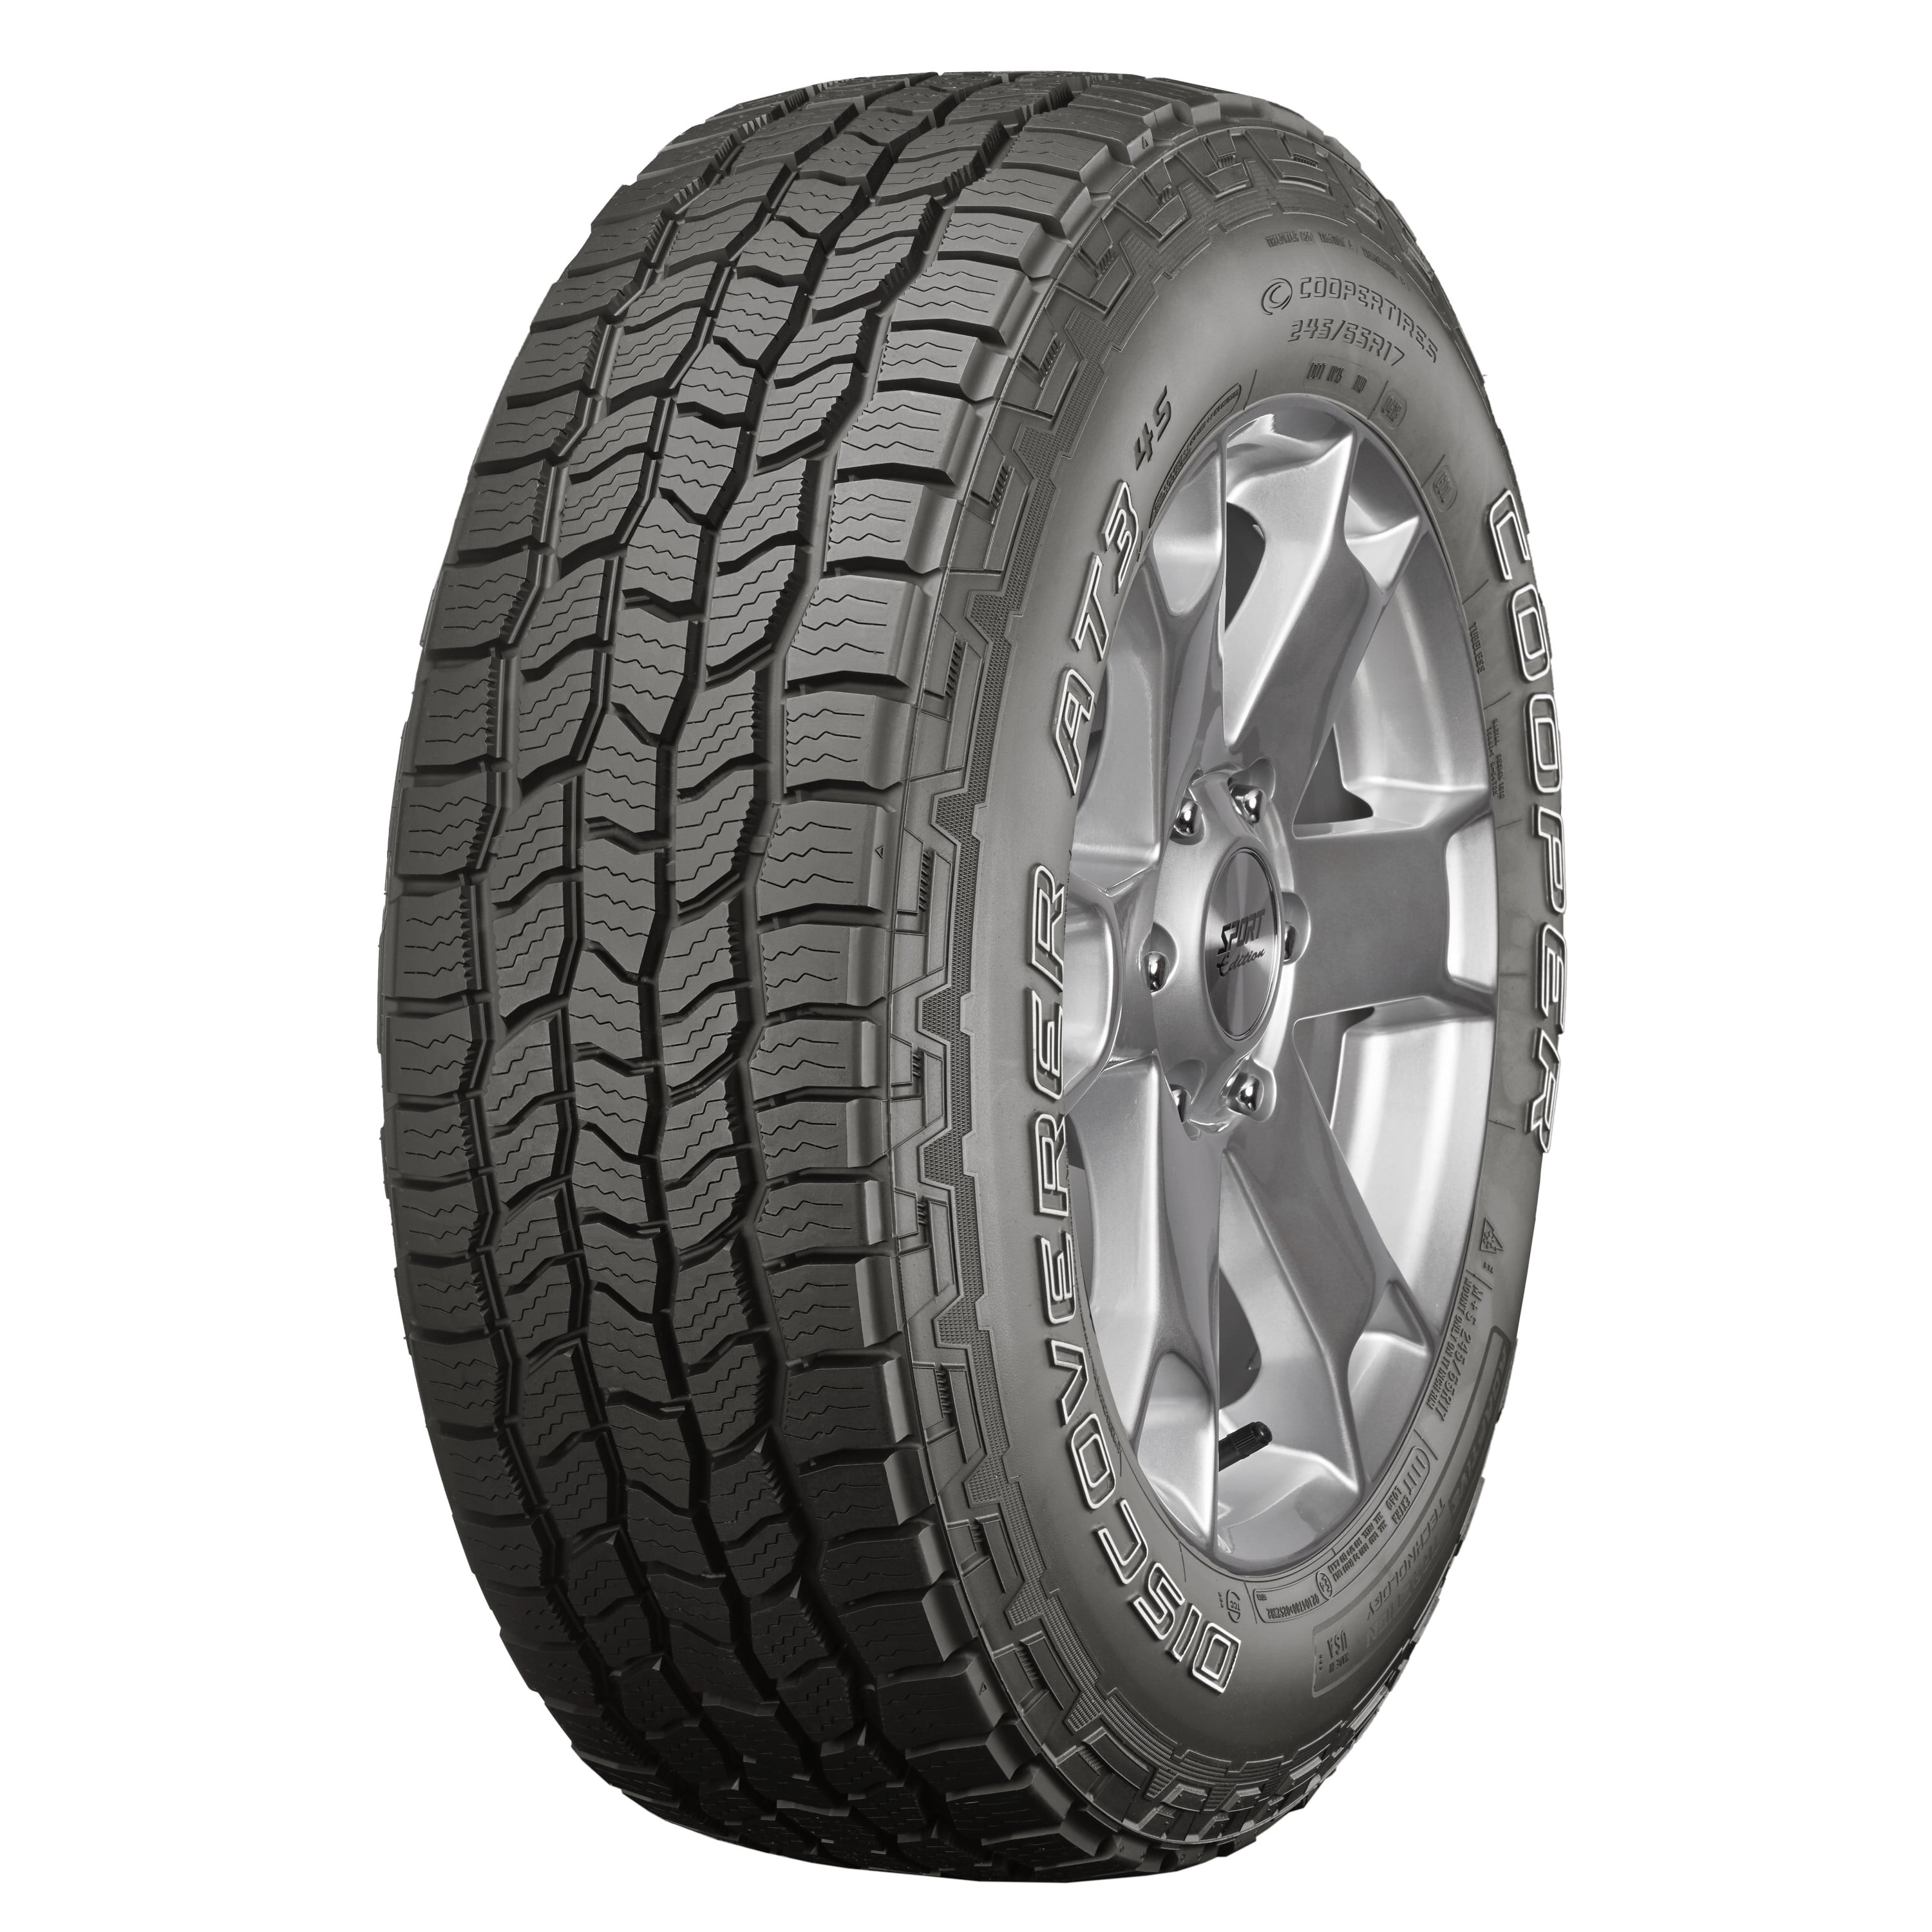 cooper-discoverer-at3-4s-all-season-235-60r17-102t-tire-walmart